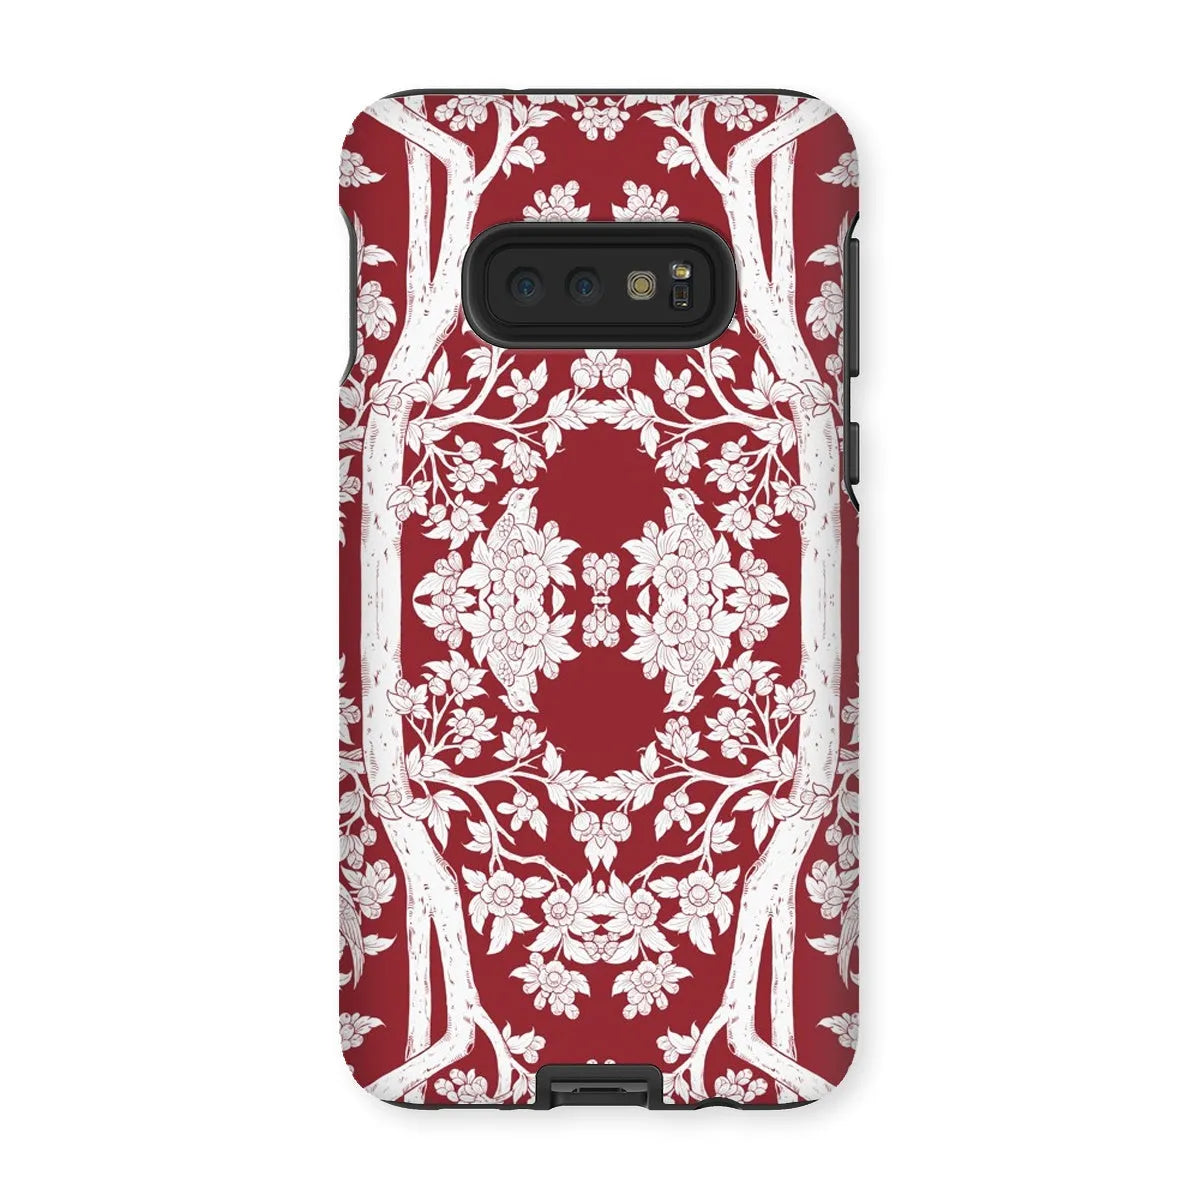 Aviary Red Aesthetic Pattern Art Phone Case - Samsung Galaxy S10e / Matte - Mobile Phone Cases - Aesthetic Art